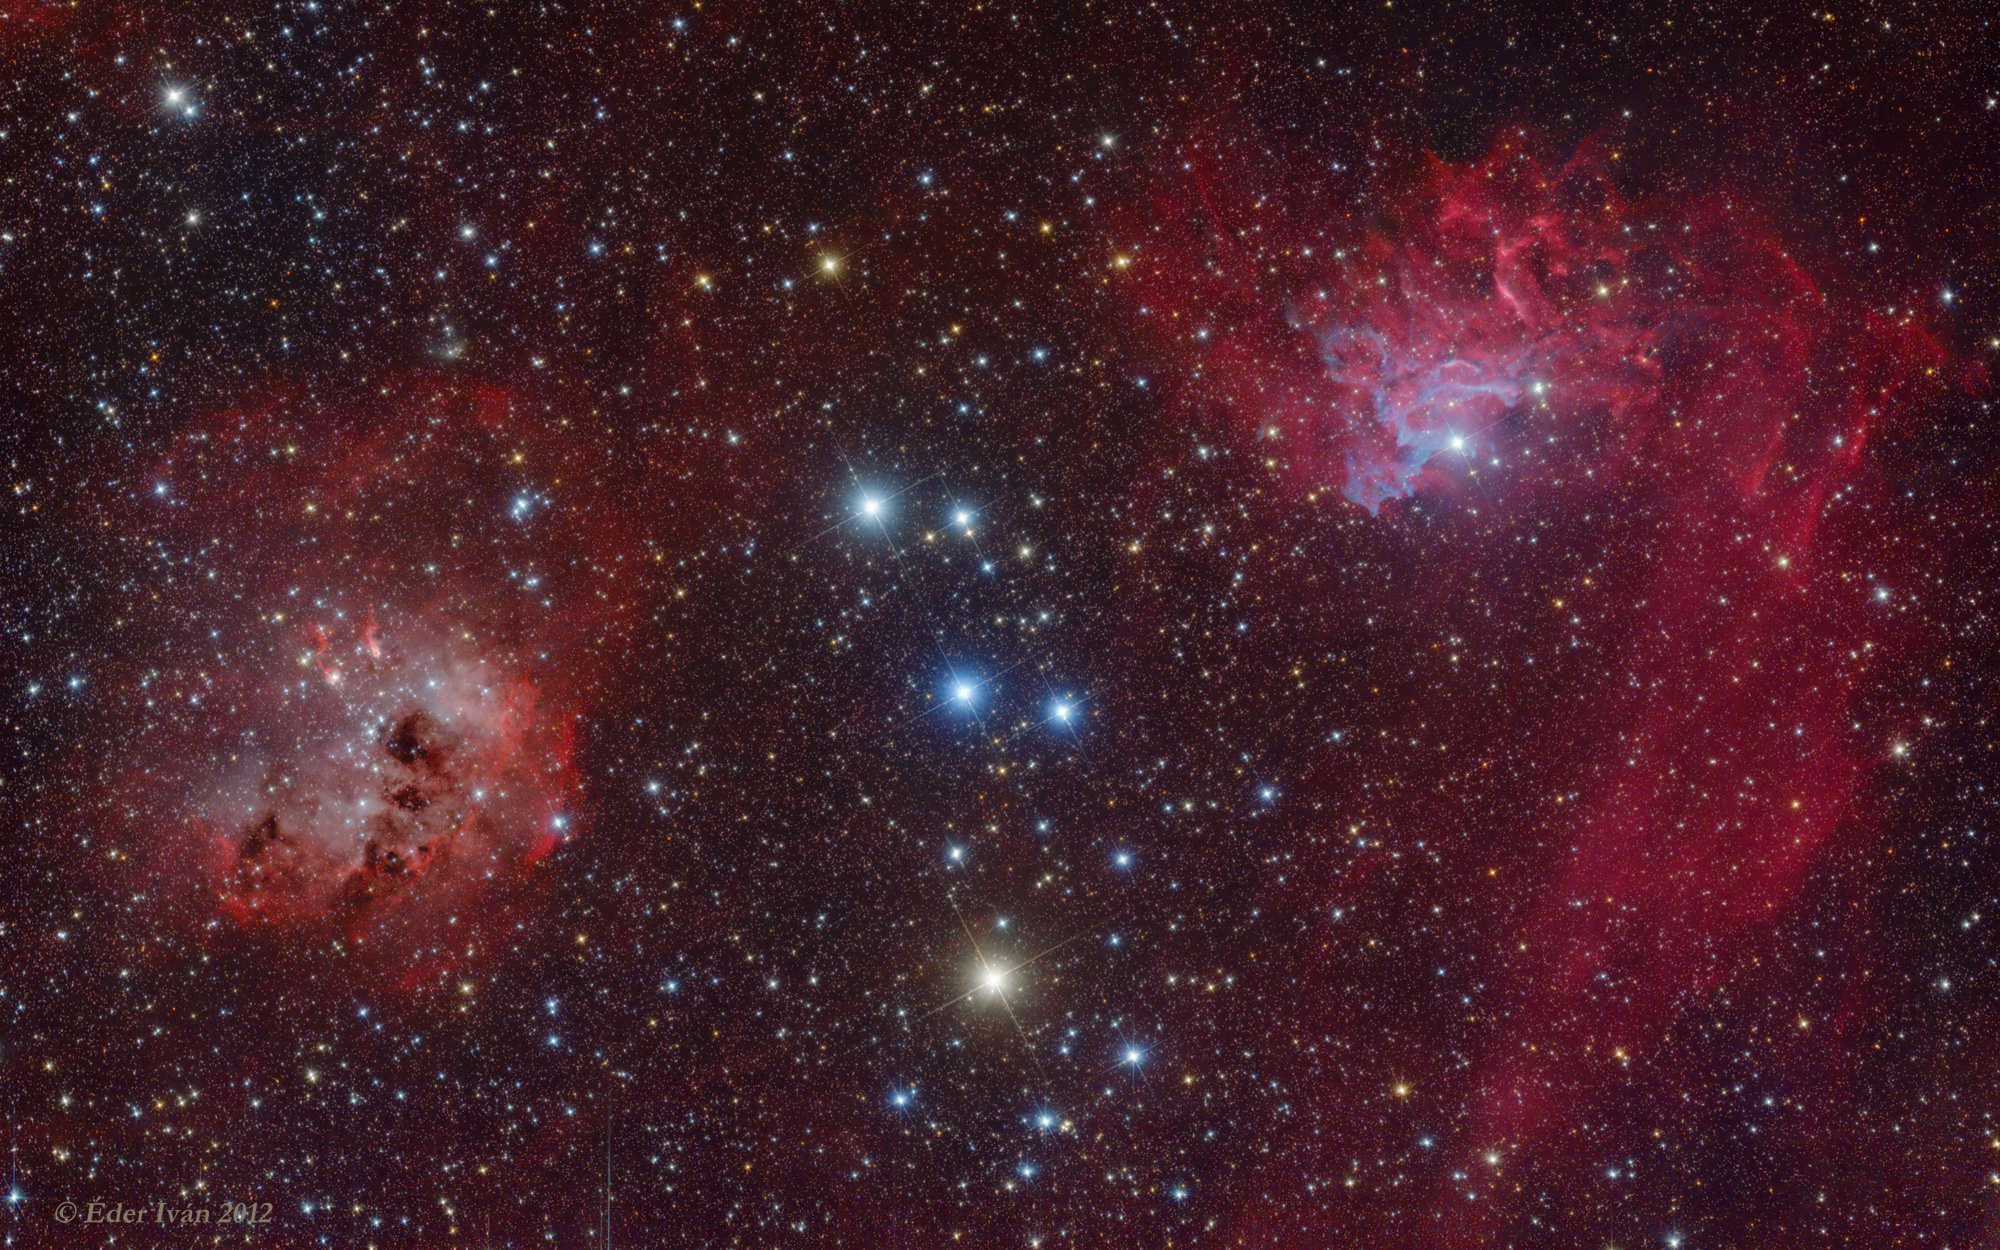 The beautiful pair of IC 405 and IC 410